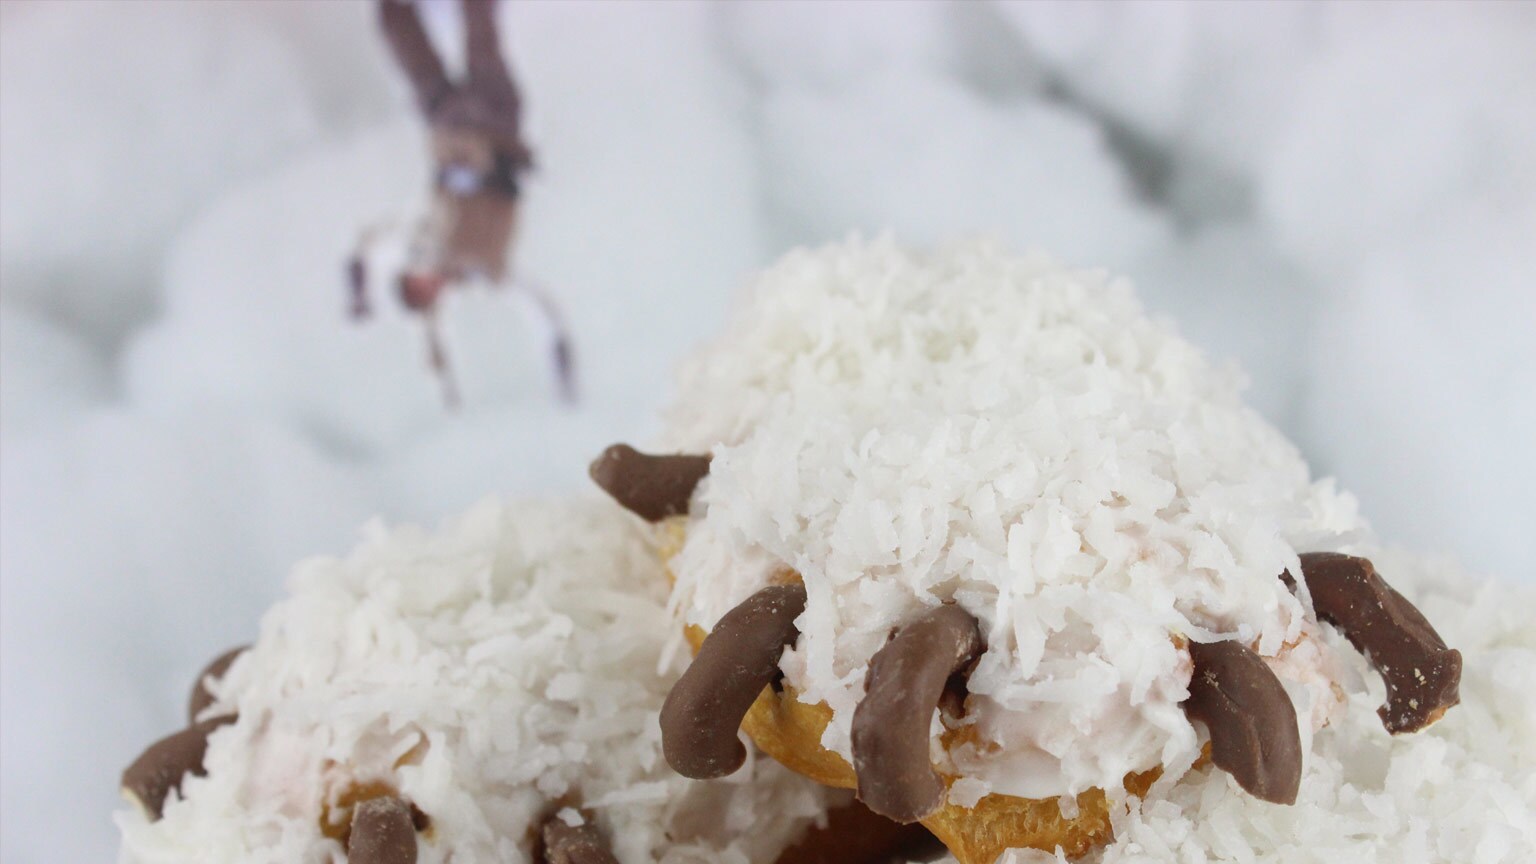 Wampa Arm Donuts are a Sweet Hoth Treat